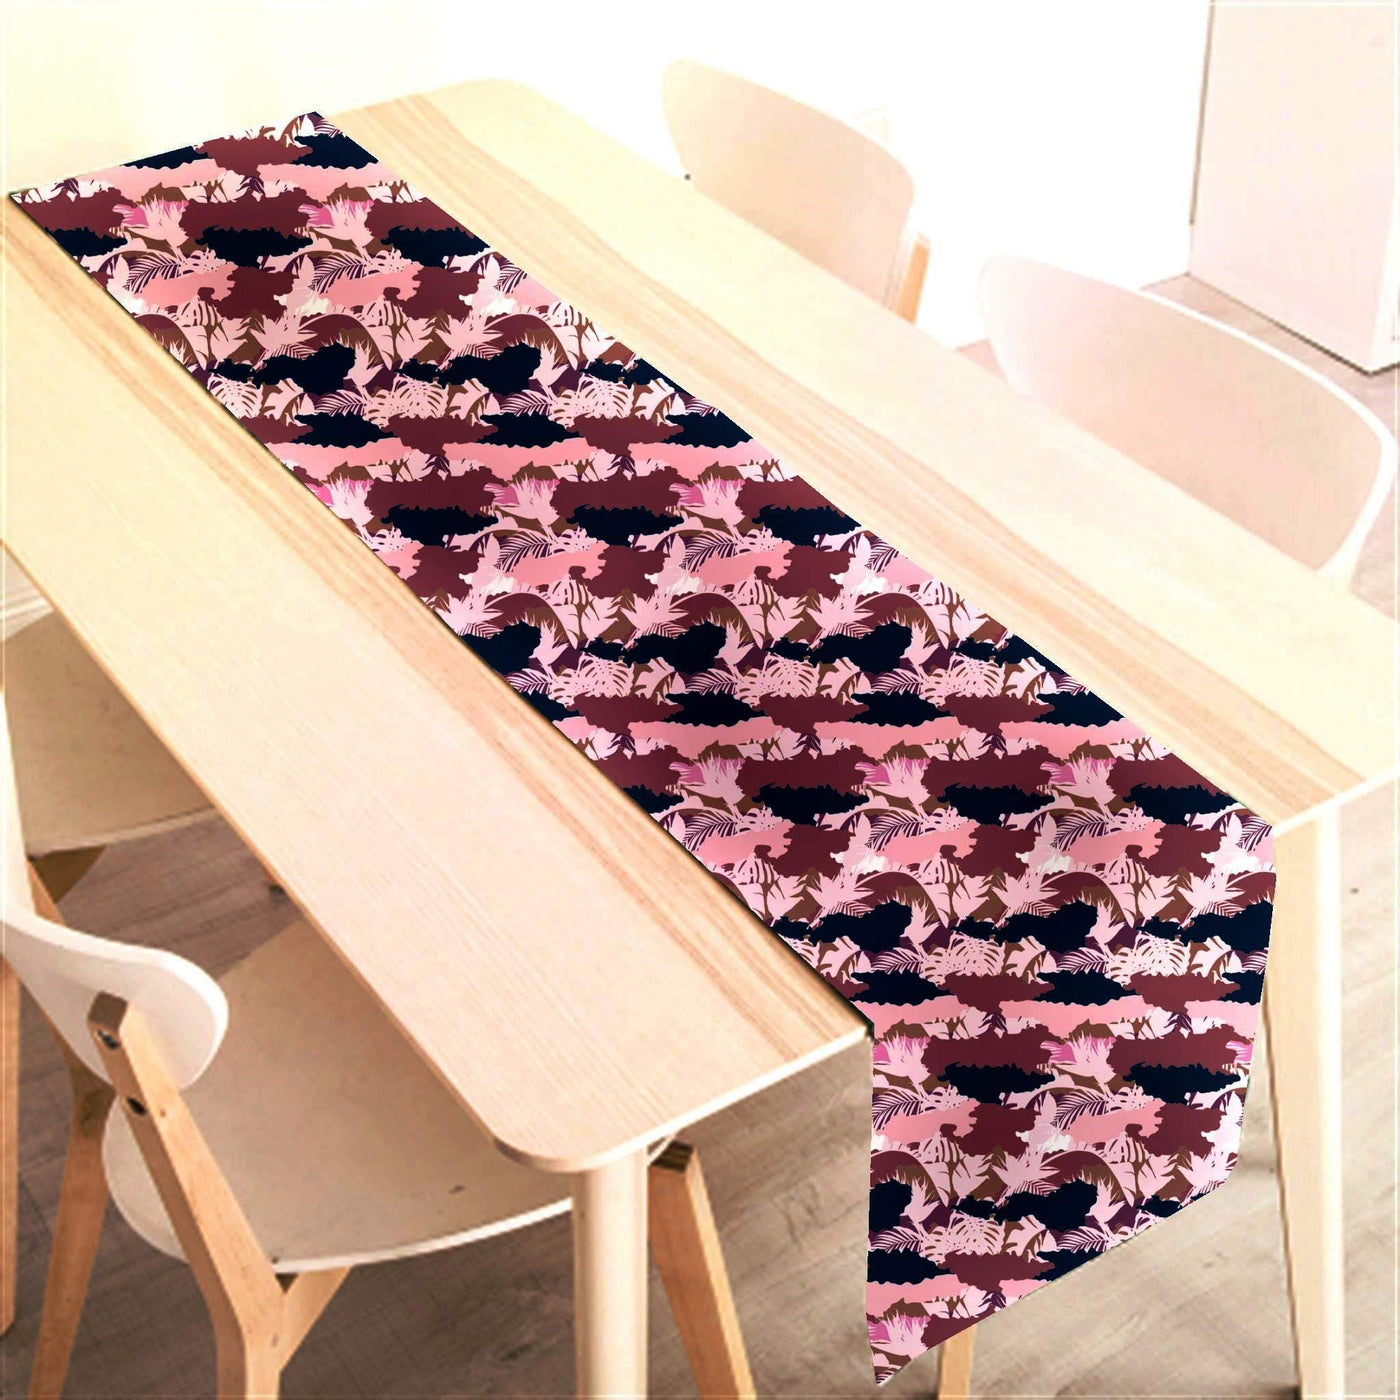 AAYU Pink Imitation Linen Table Runner 14 x 108 Inch Runner for Everyday, Dinner Party, Outdoor Dining, Events, Decor